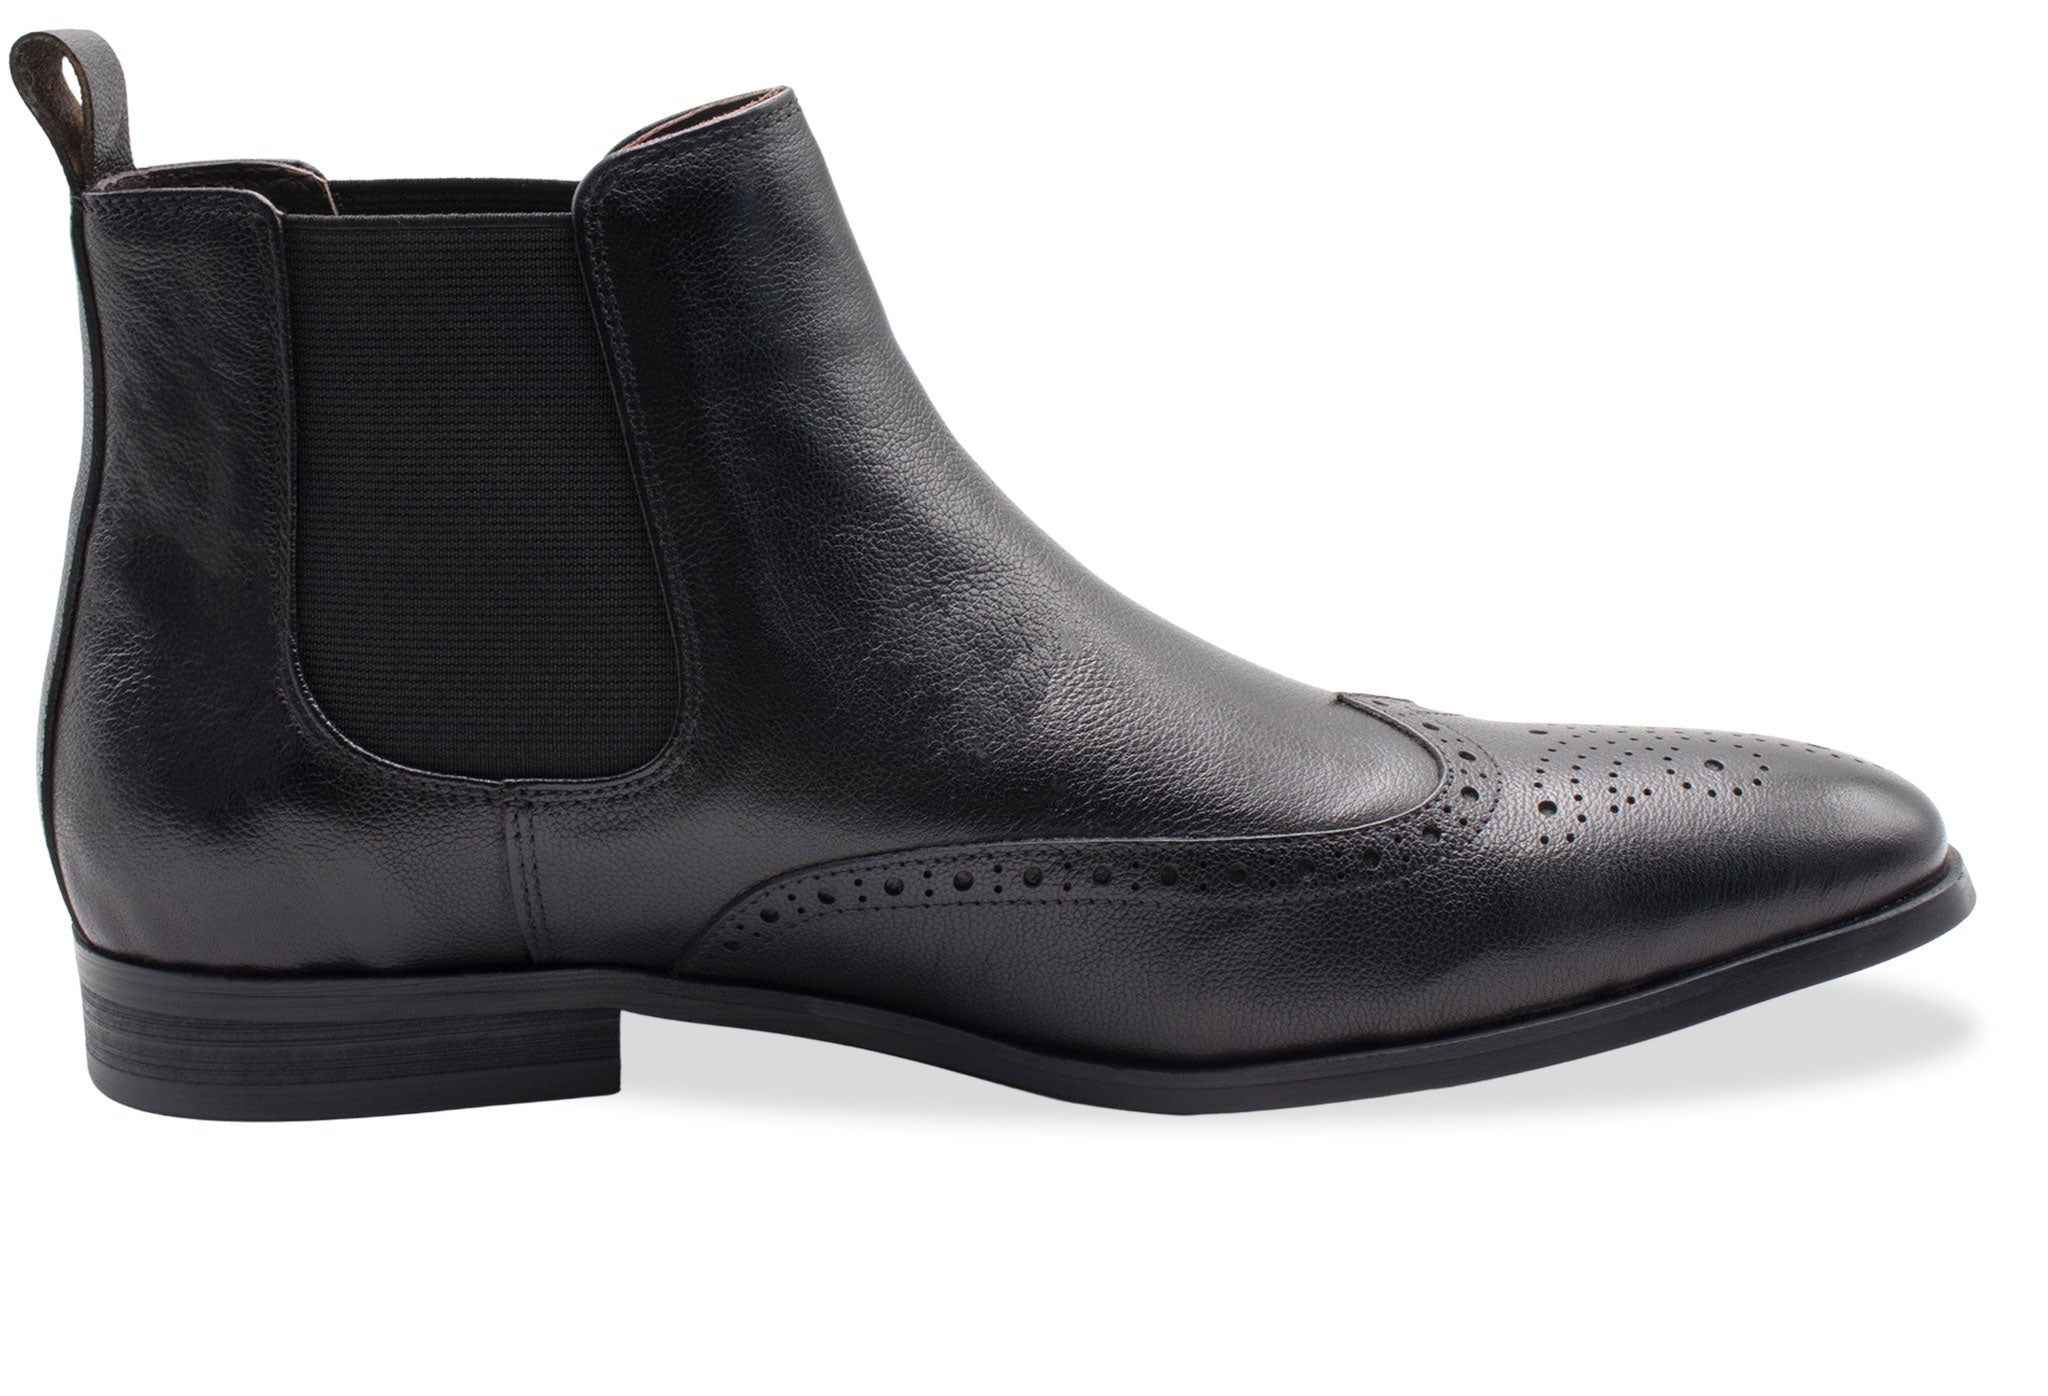 Chelsea Boots For Men Collection - Arden Teal